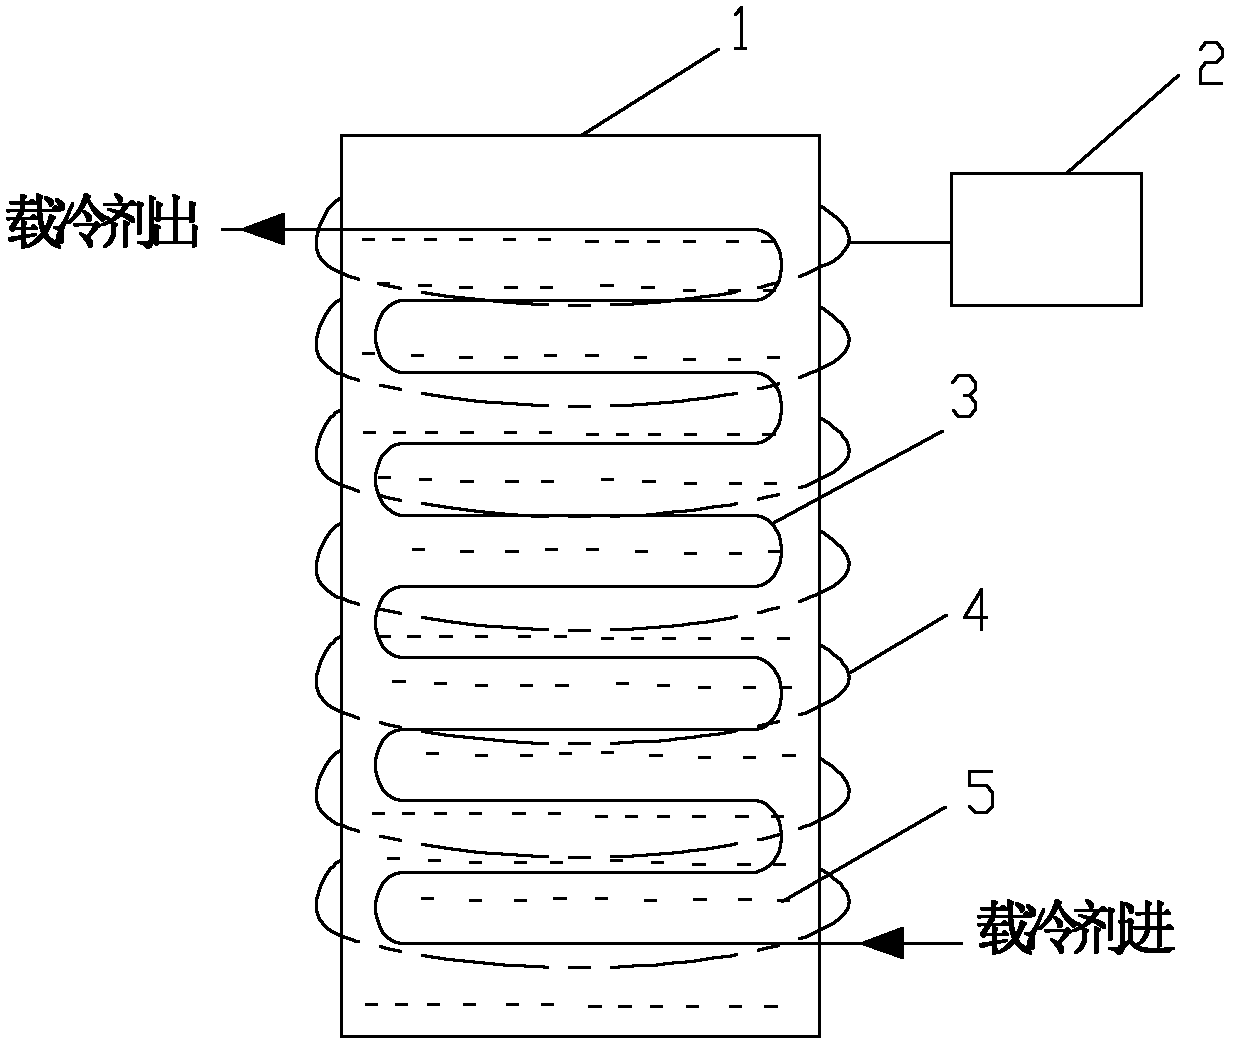 Method for boosting crystallization of phase-change cold-storing material of eutectic salt solution